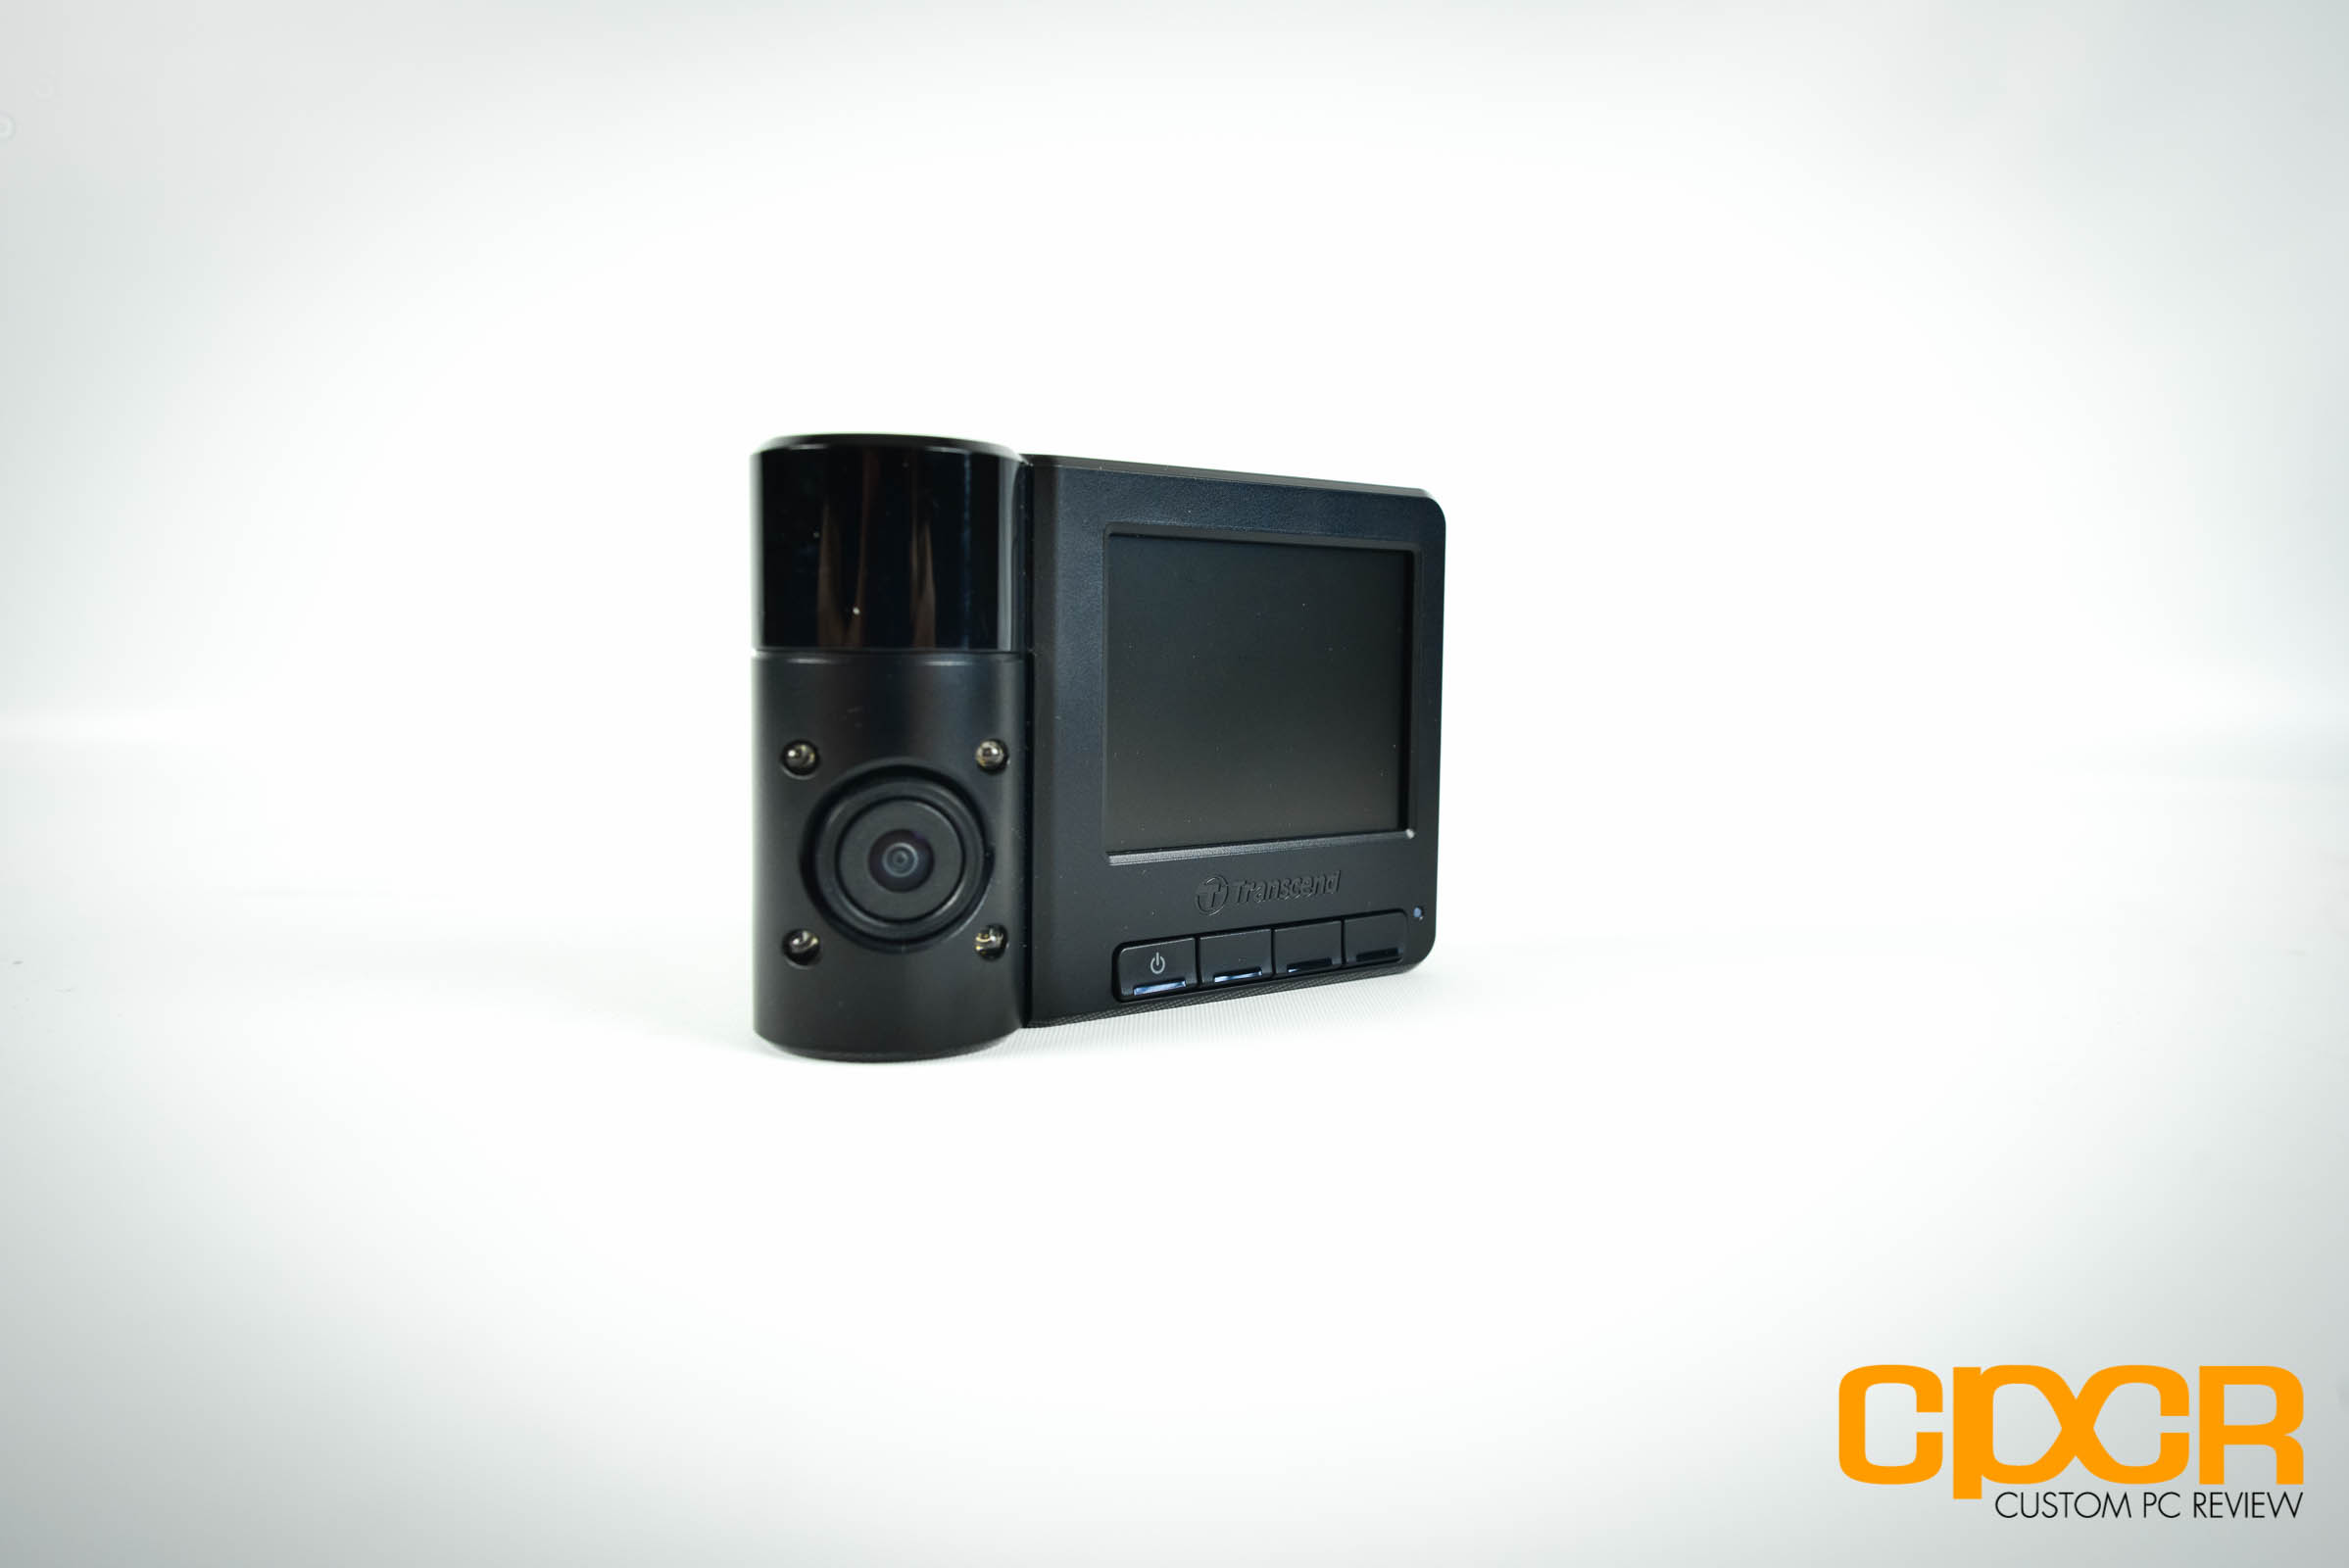 How to Replace Transcend Pro 520 Dashcam Battery 